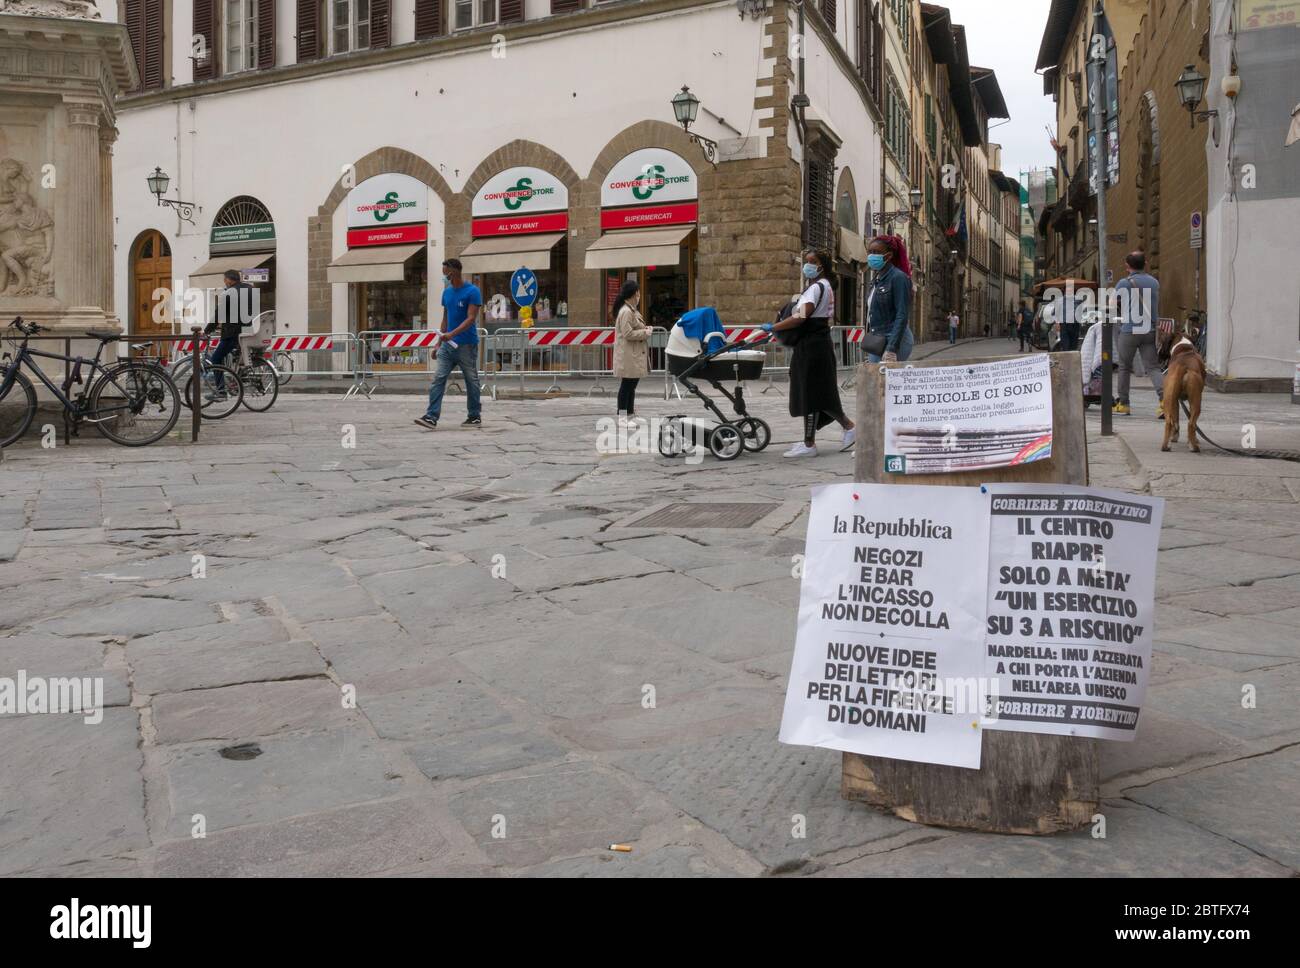 Florence, Italy - 2020, May 18: People walking on the city street during covid-19 lockdown. Headlines in the foreground. Stock Photo